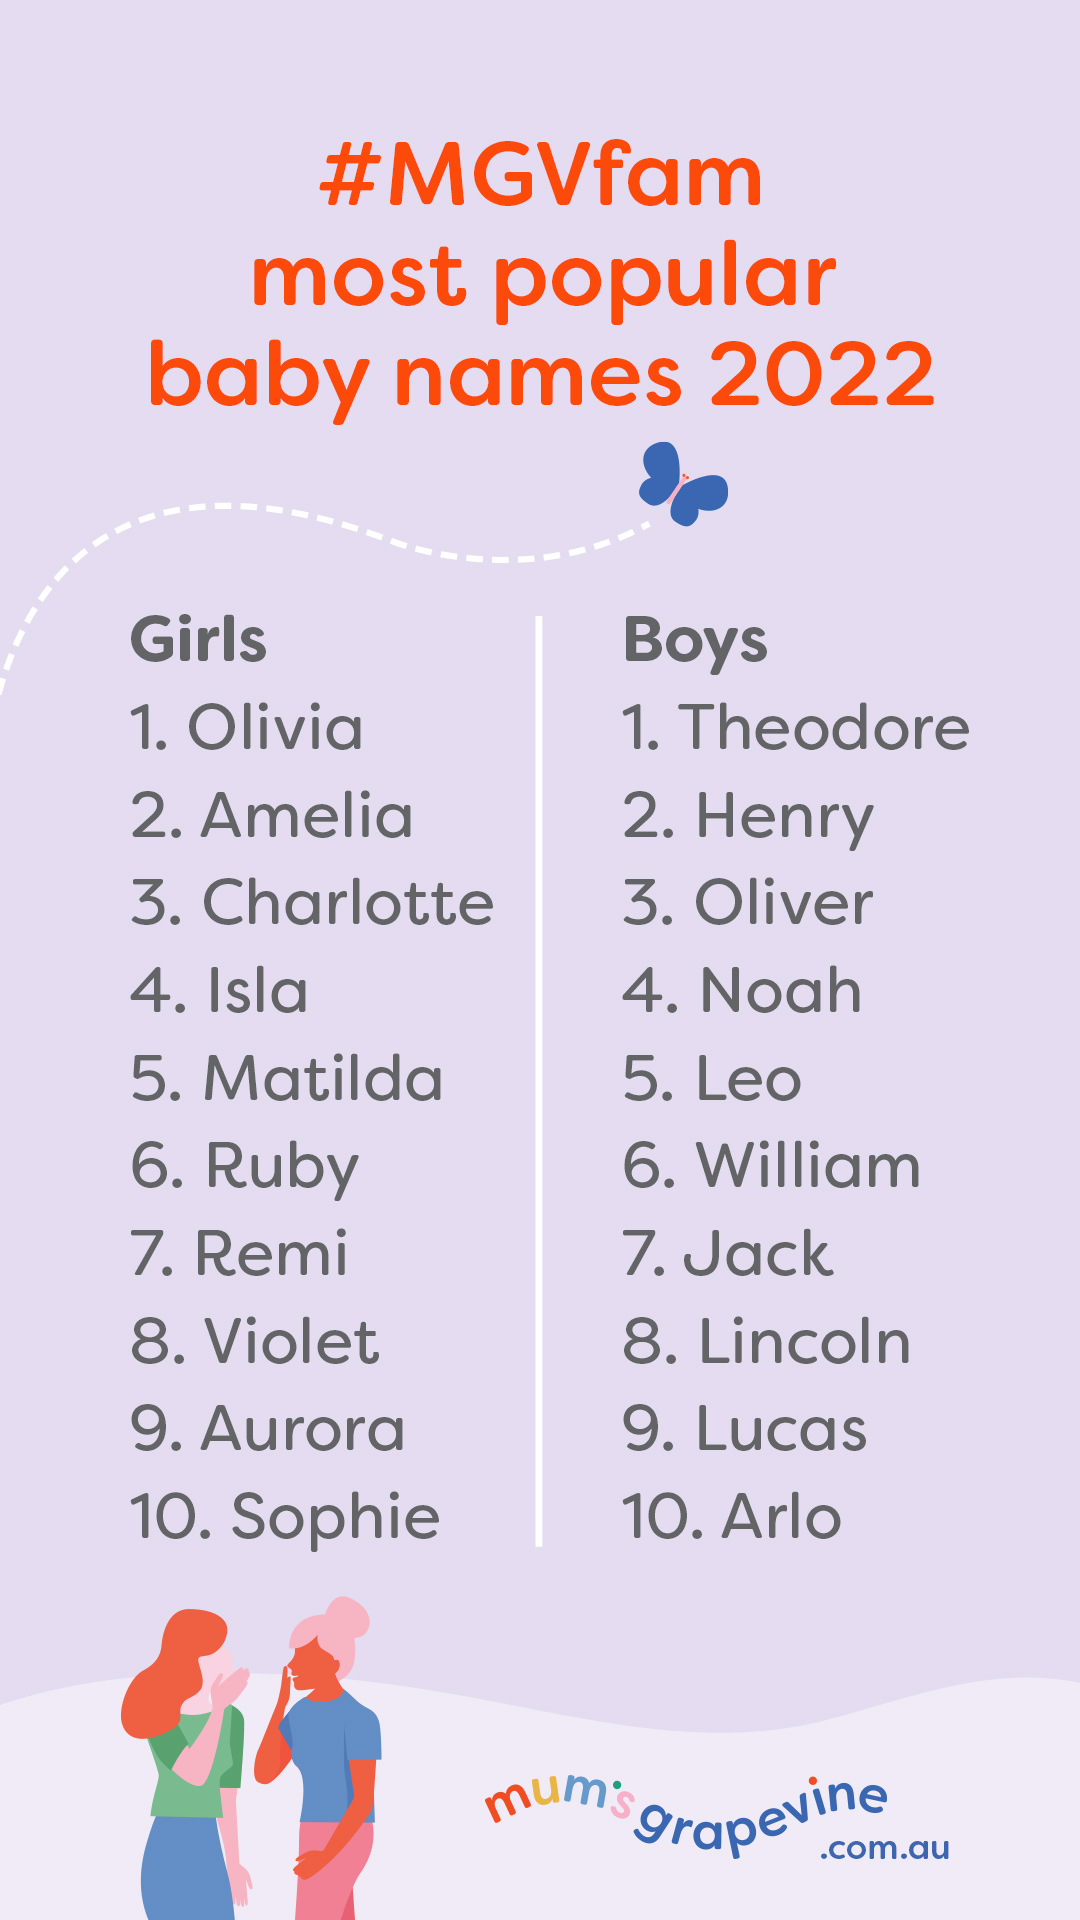 MGVfam's most popular baby names 2022